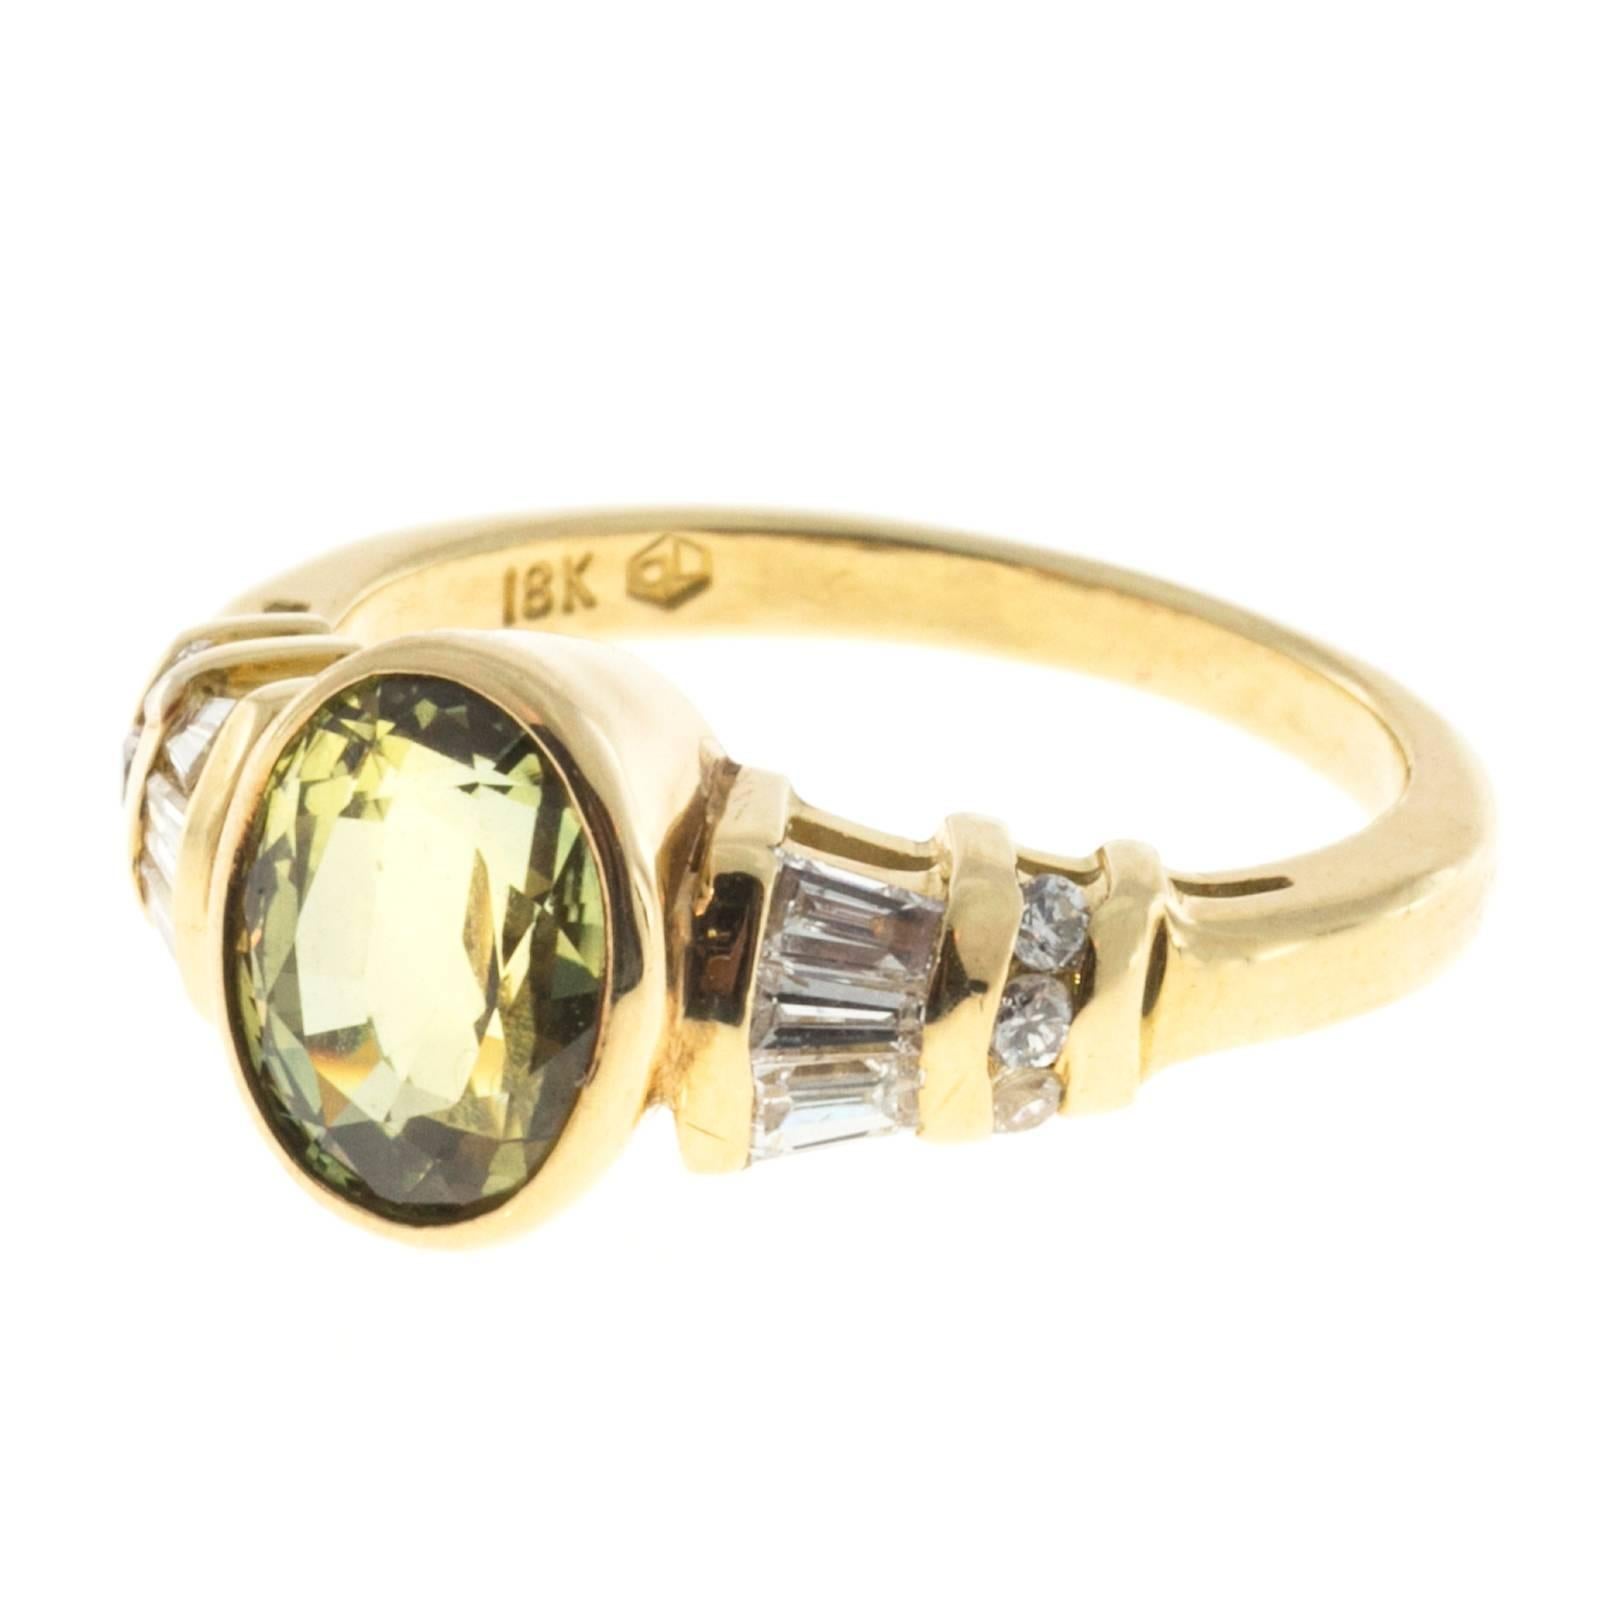 Peter Suchy Natural no heat green yellow Sapphire and diamond 18k yellow gold engagement ring.

1 Natural no heat greenish yellow oval Sapphire not enhanced 2.64ct natural Sapphire, 50% green and 50% yellow. AGL Certificate # GB 50724
6 round full